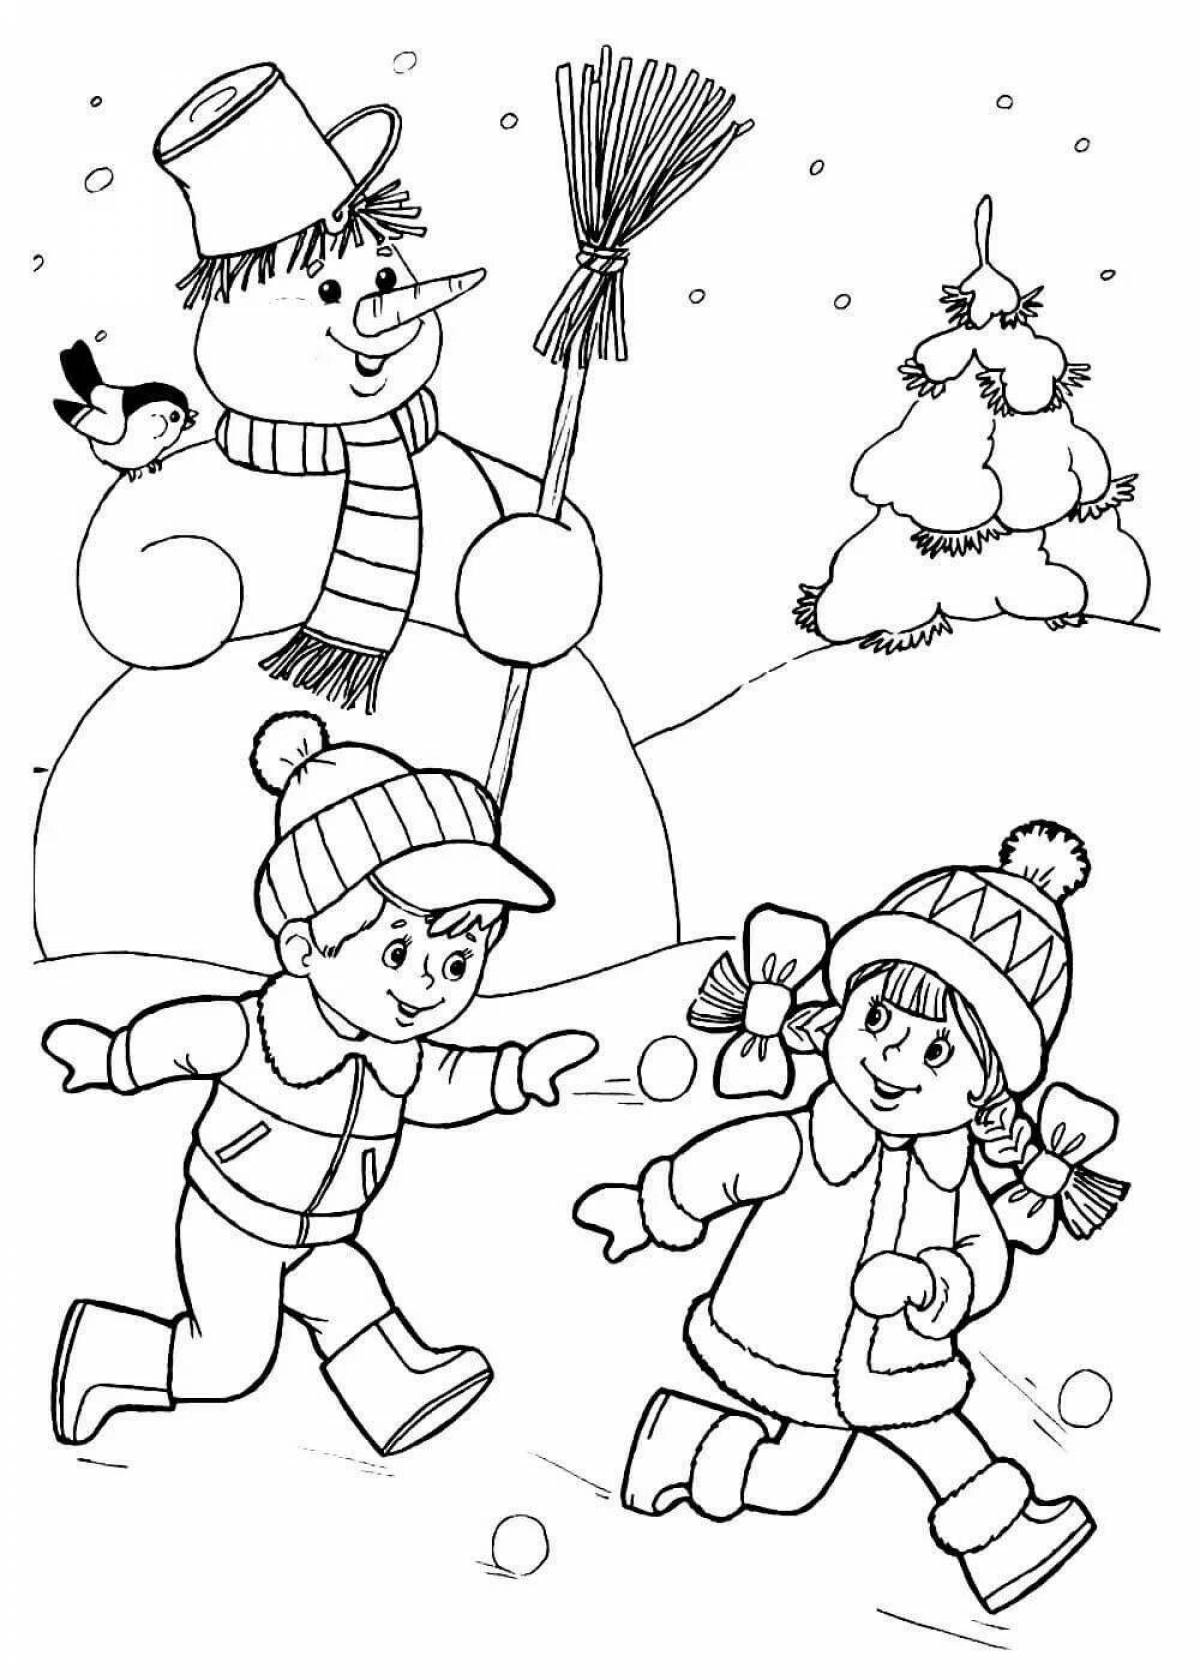 Fun winter activities coloring page